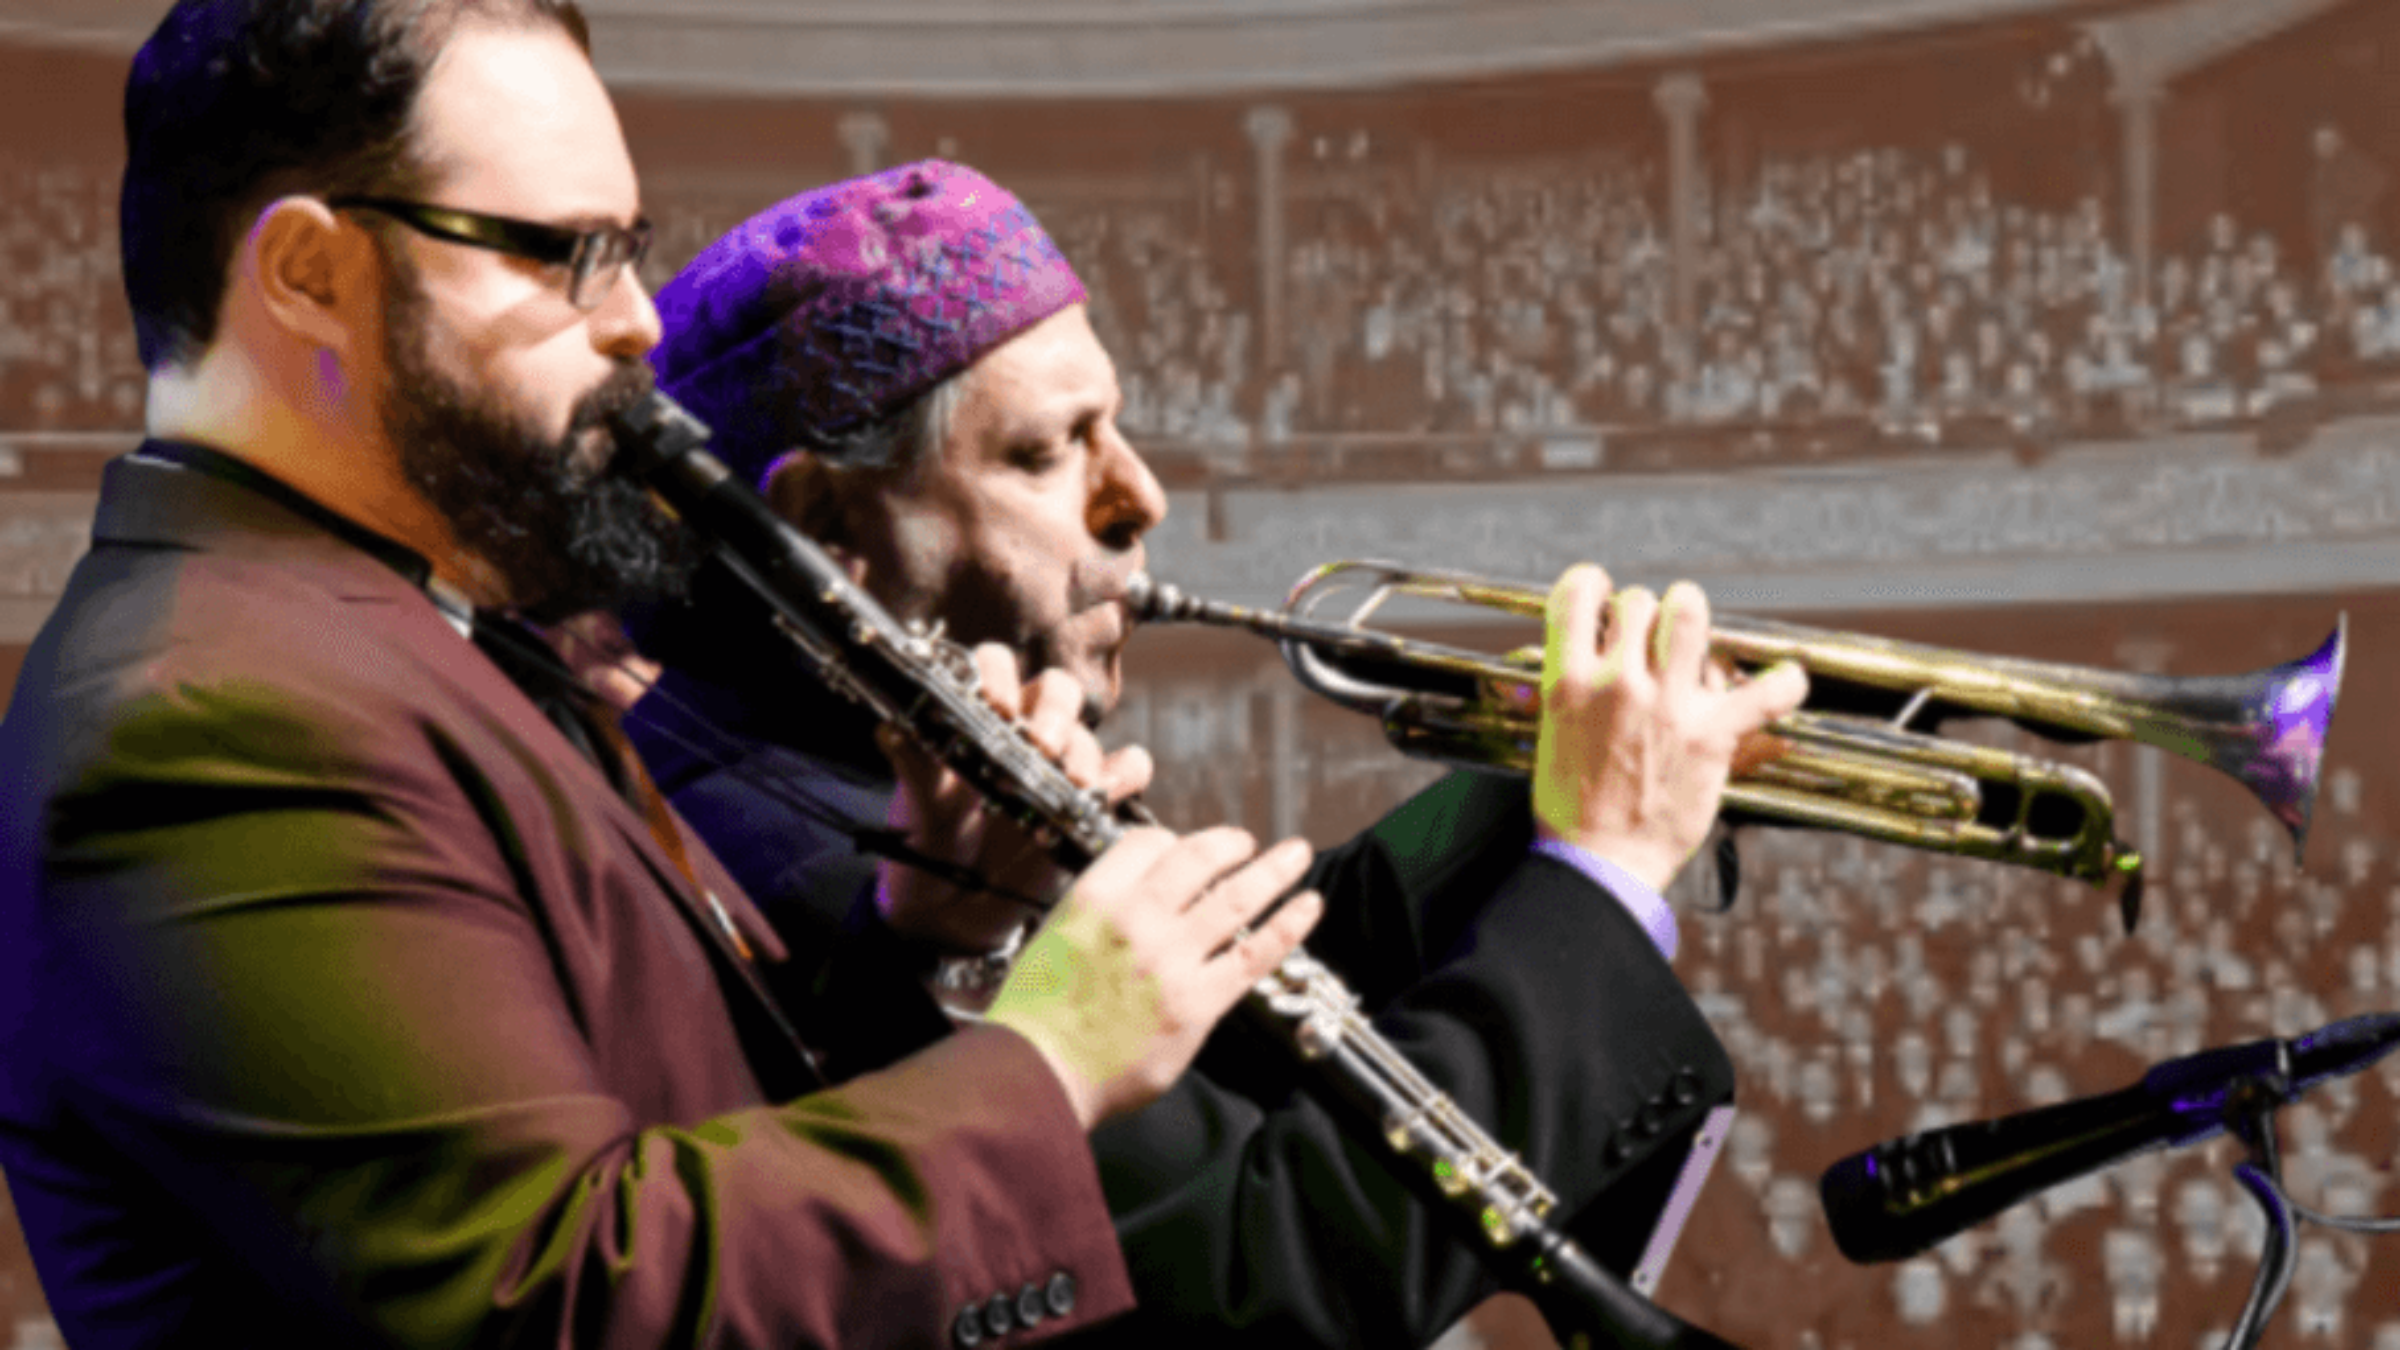 The festival will include performances with musicians like these two klezmer stars Michael Winograd and Frank London 